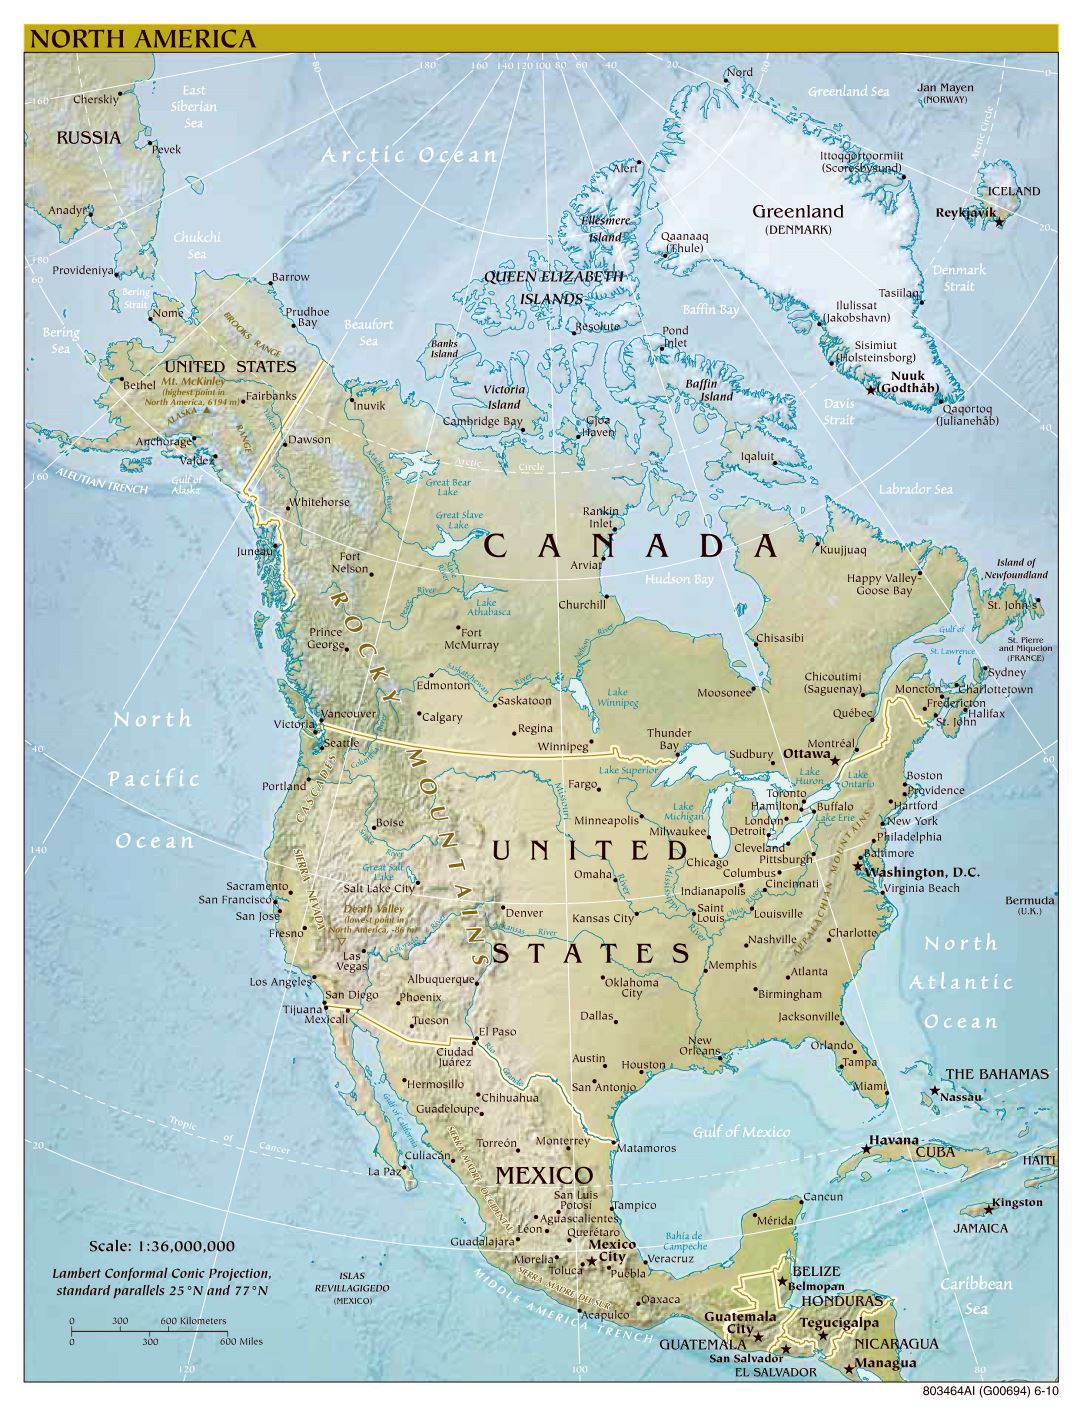 Large scale political map of North America with relief, major cities and capitals - 2010